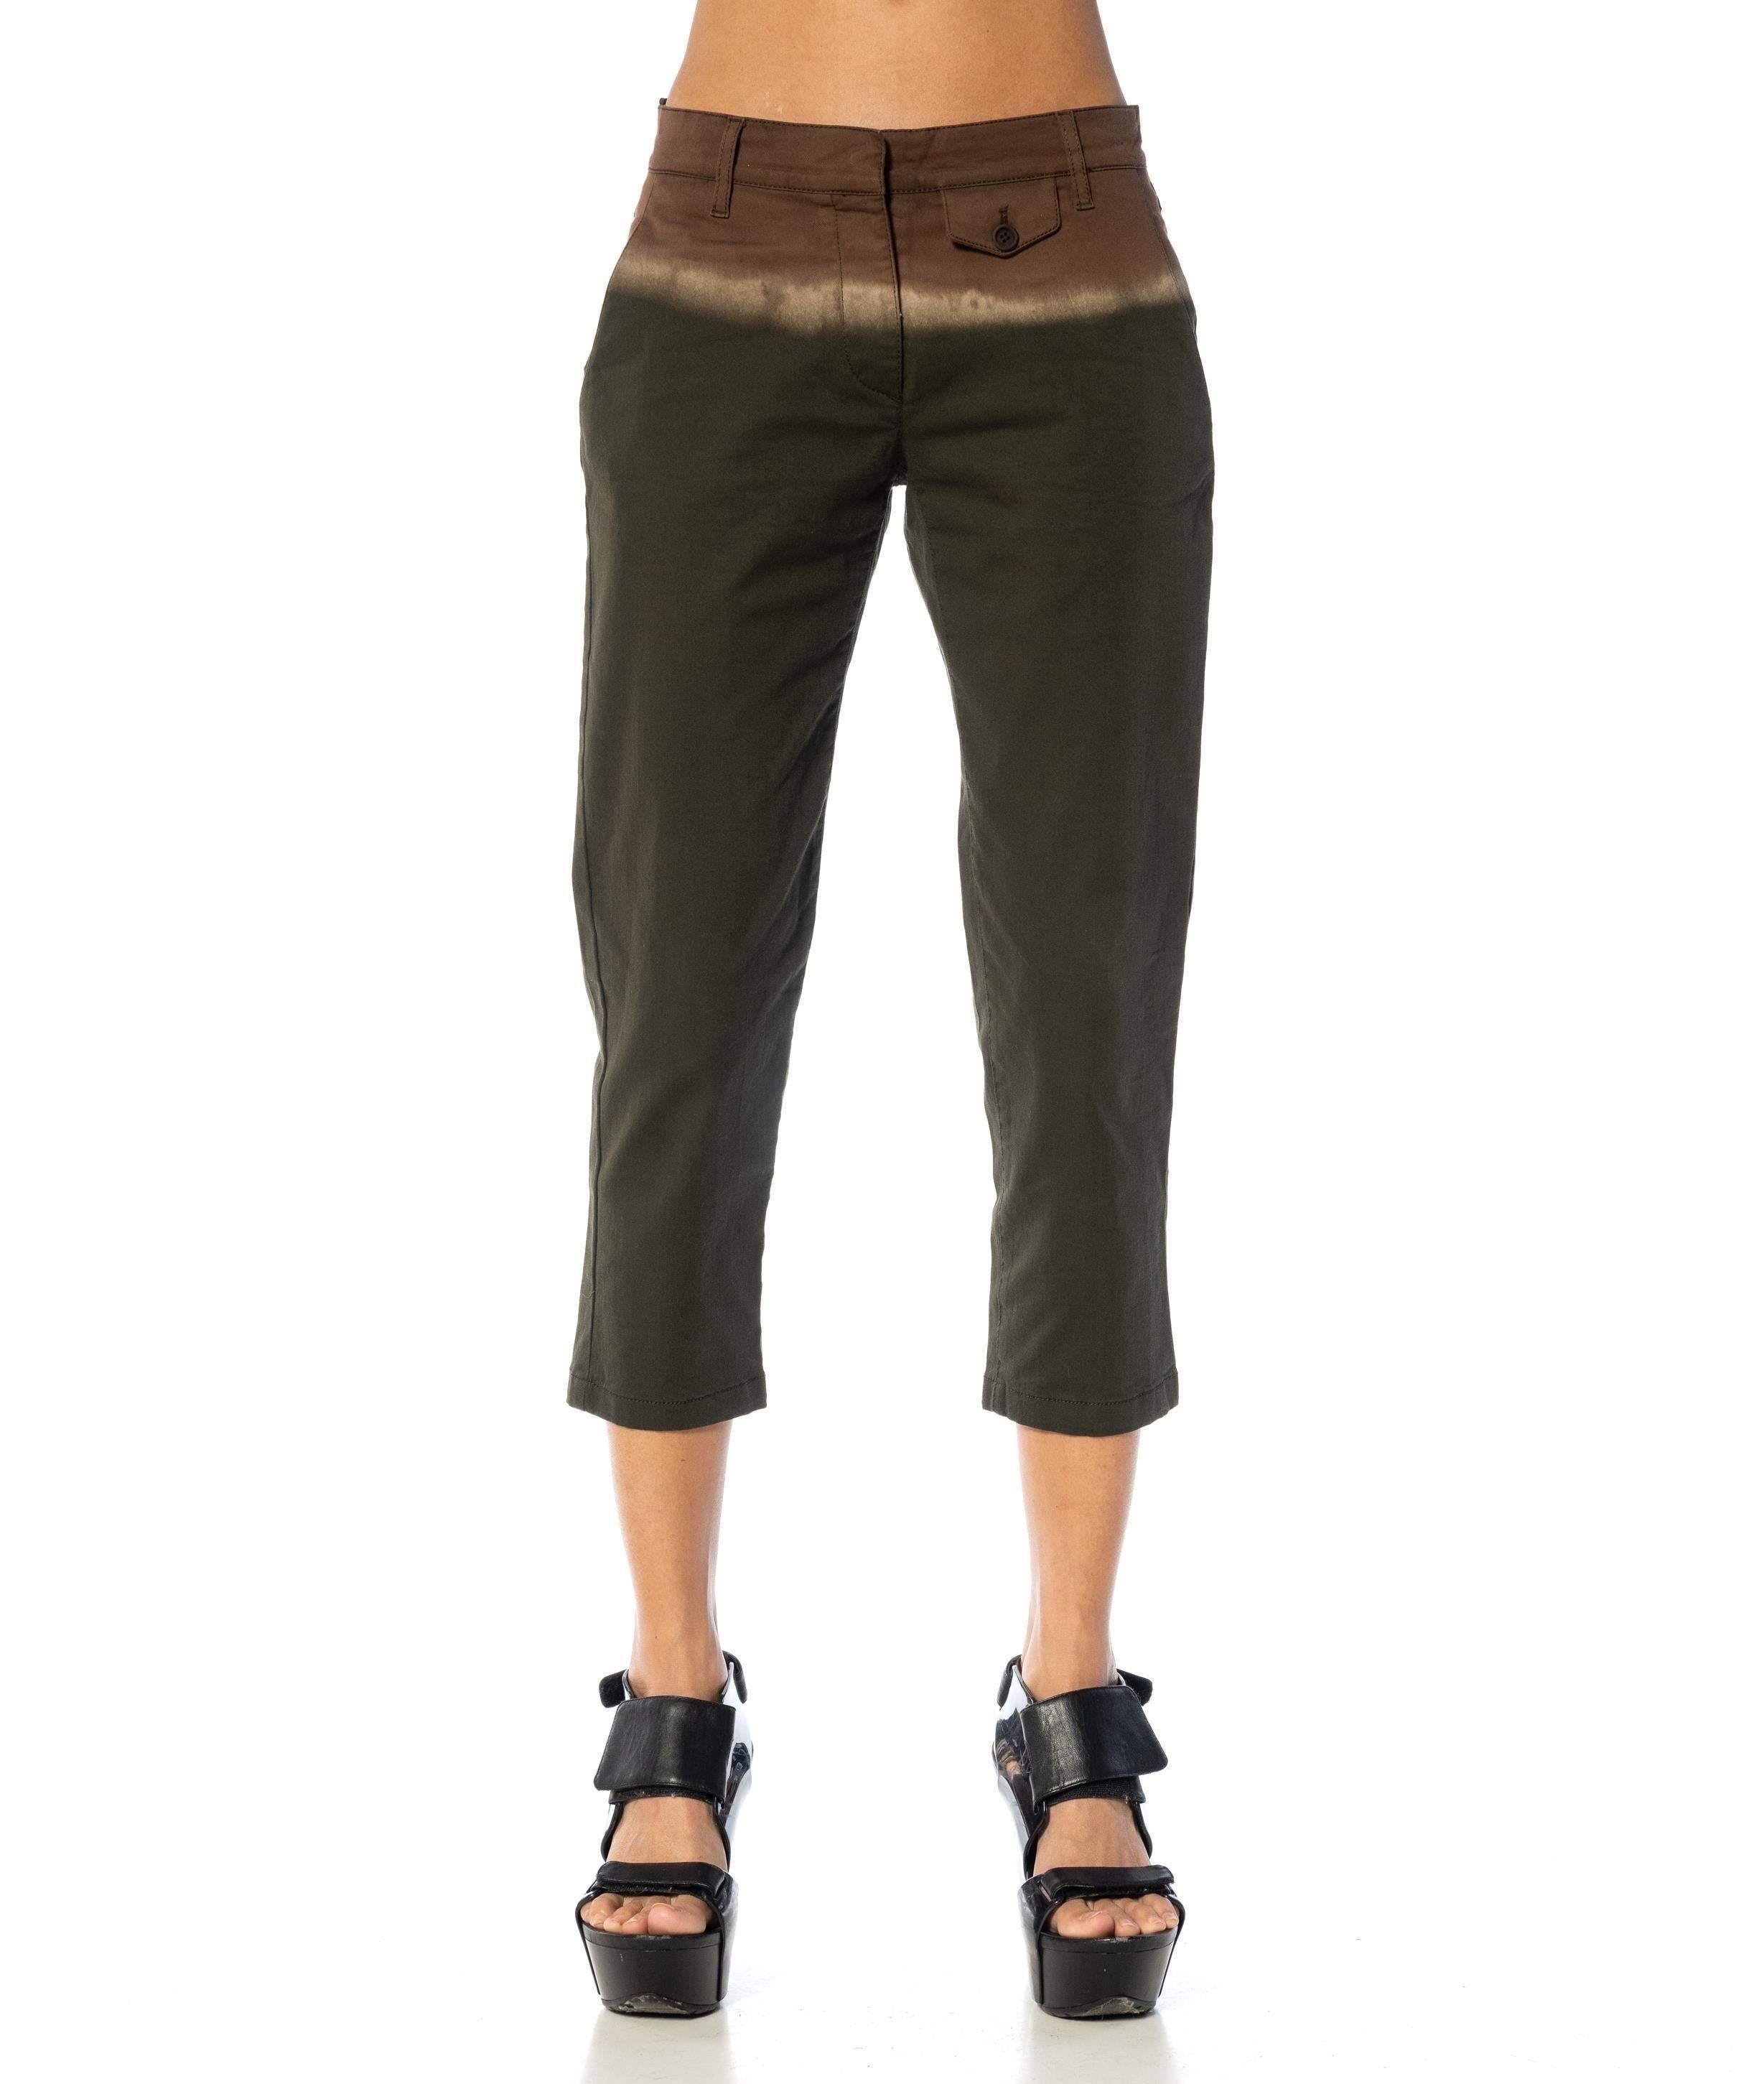 2000S PRADA Brown & Olive Green Cotton Pants In Excellent Condition For Sale In New York, NY